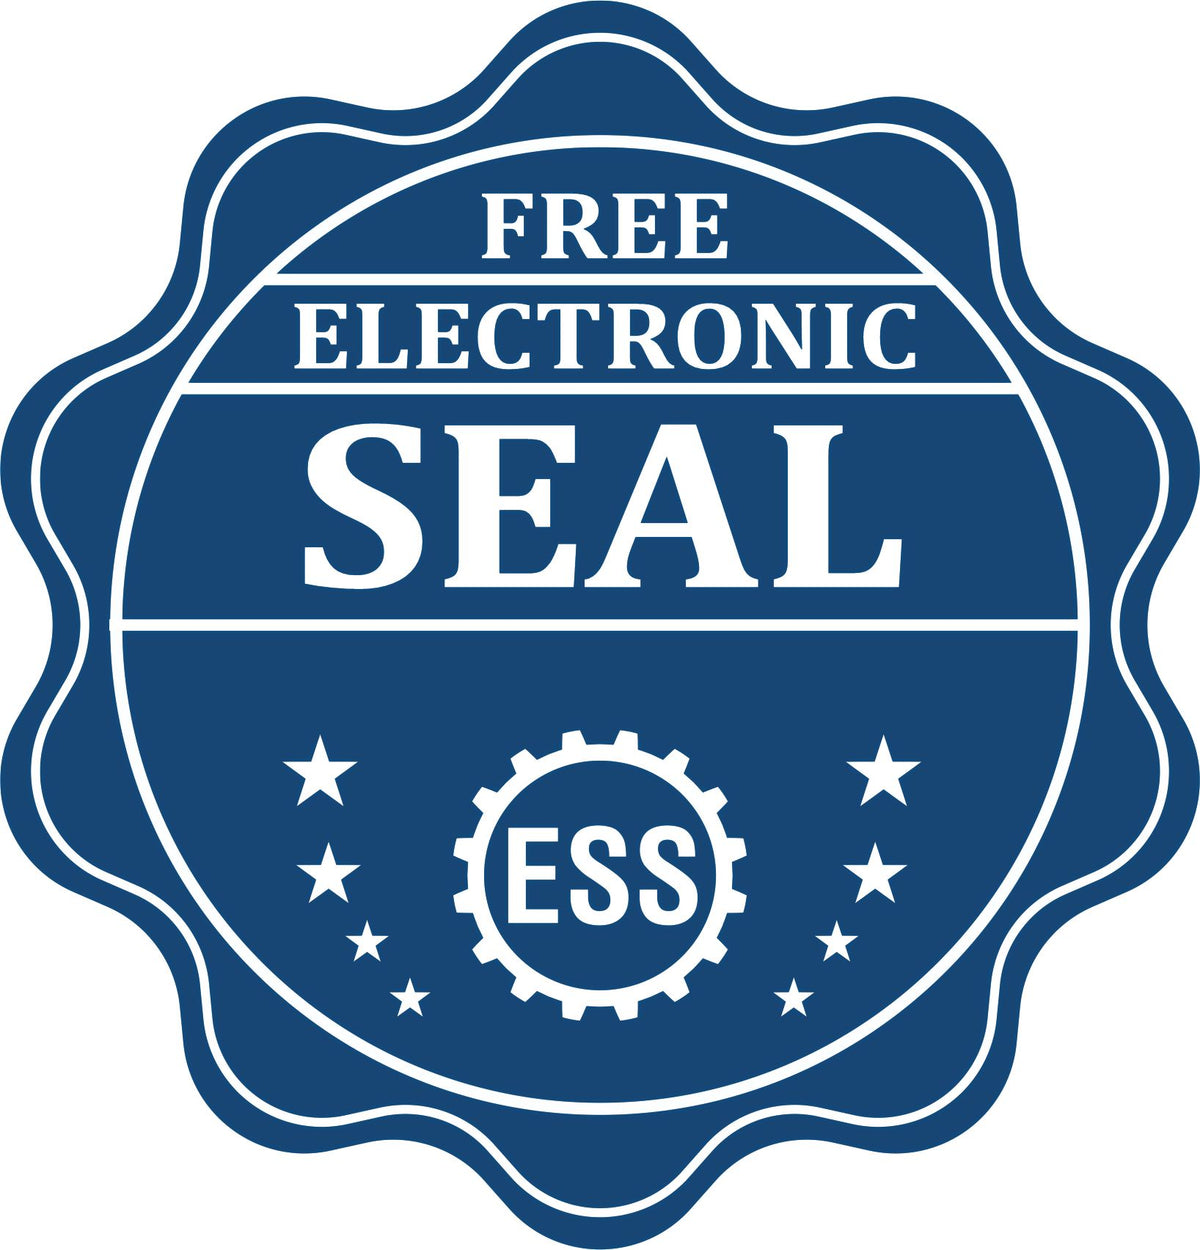 A badge showing a free electronic seal for the Slim Pre-Inked Rectangular Notary Stamp for Rhode Island with stars and the ESS gear on the emblem.